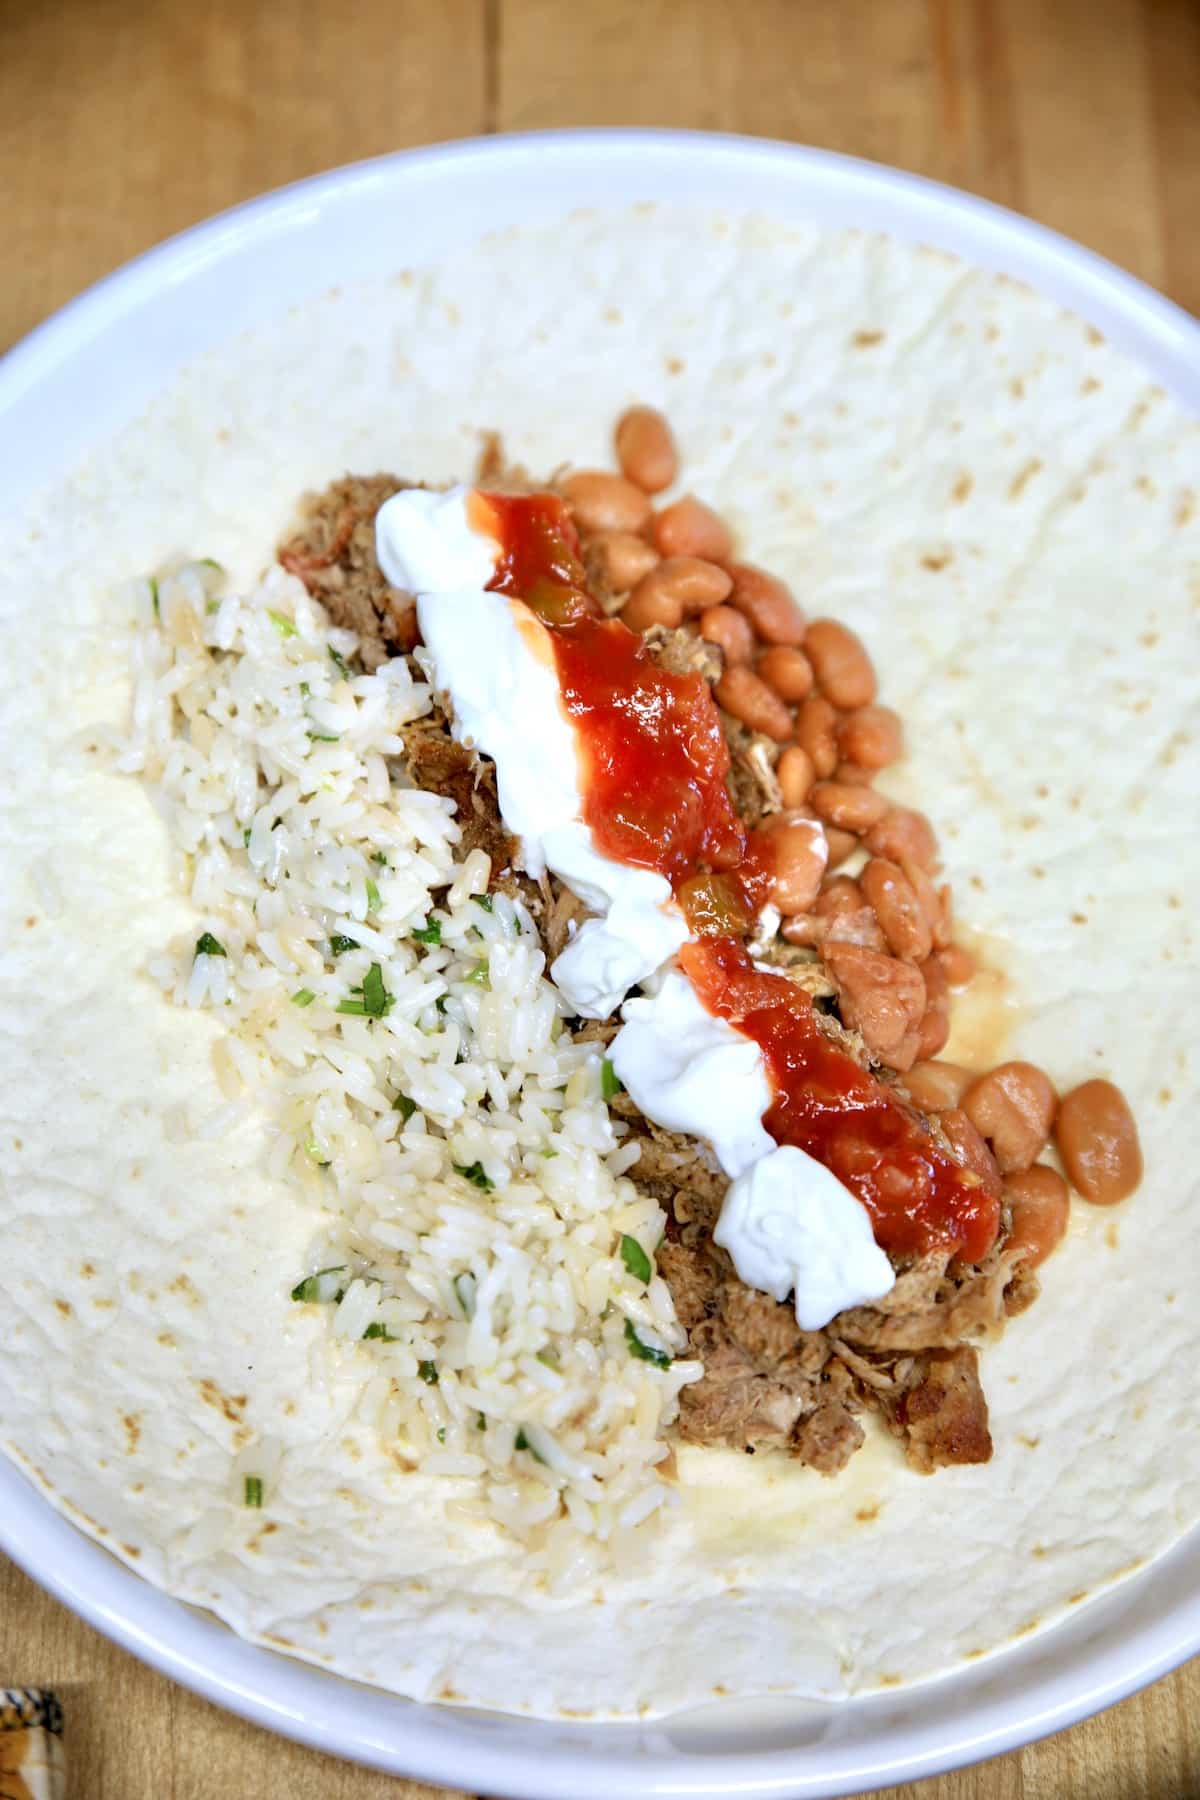 Burrito with pulled pork, rice, beans, salsa and sour cream.